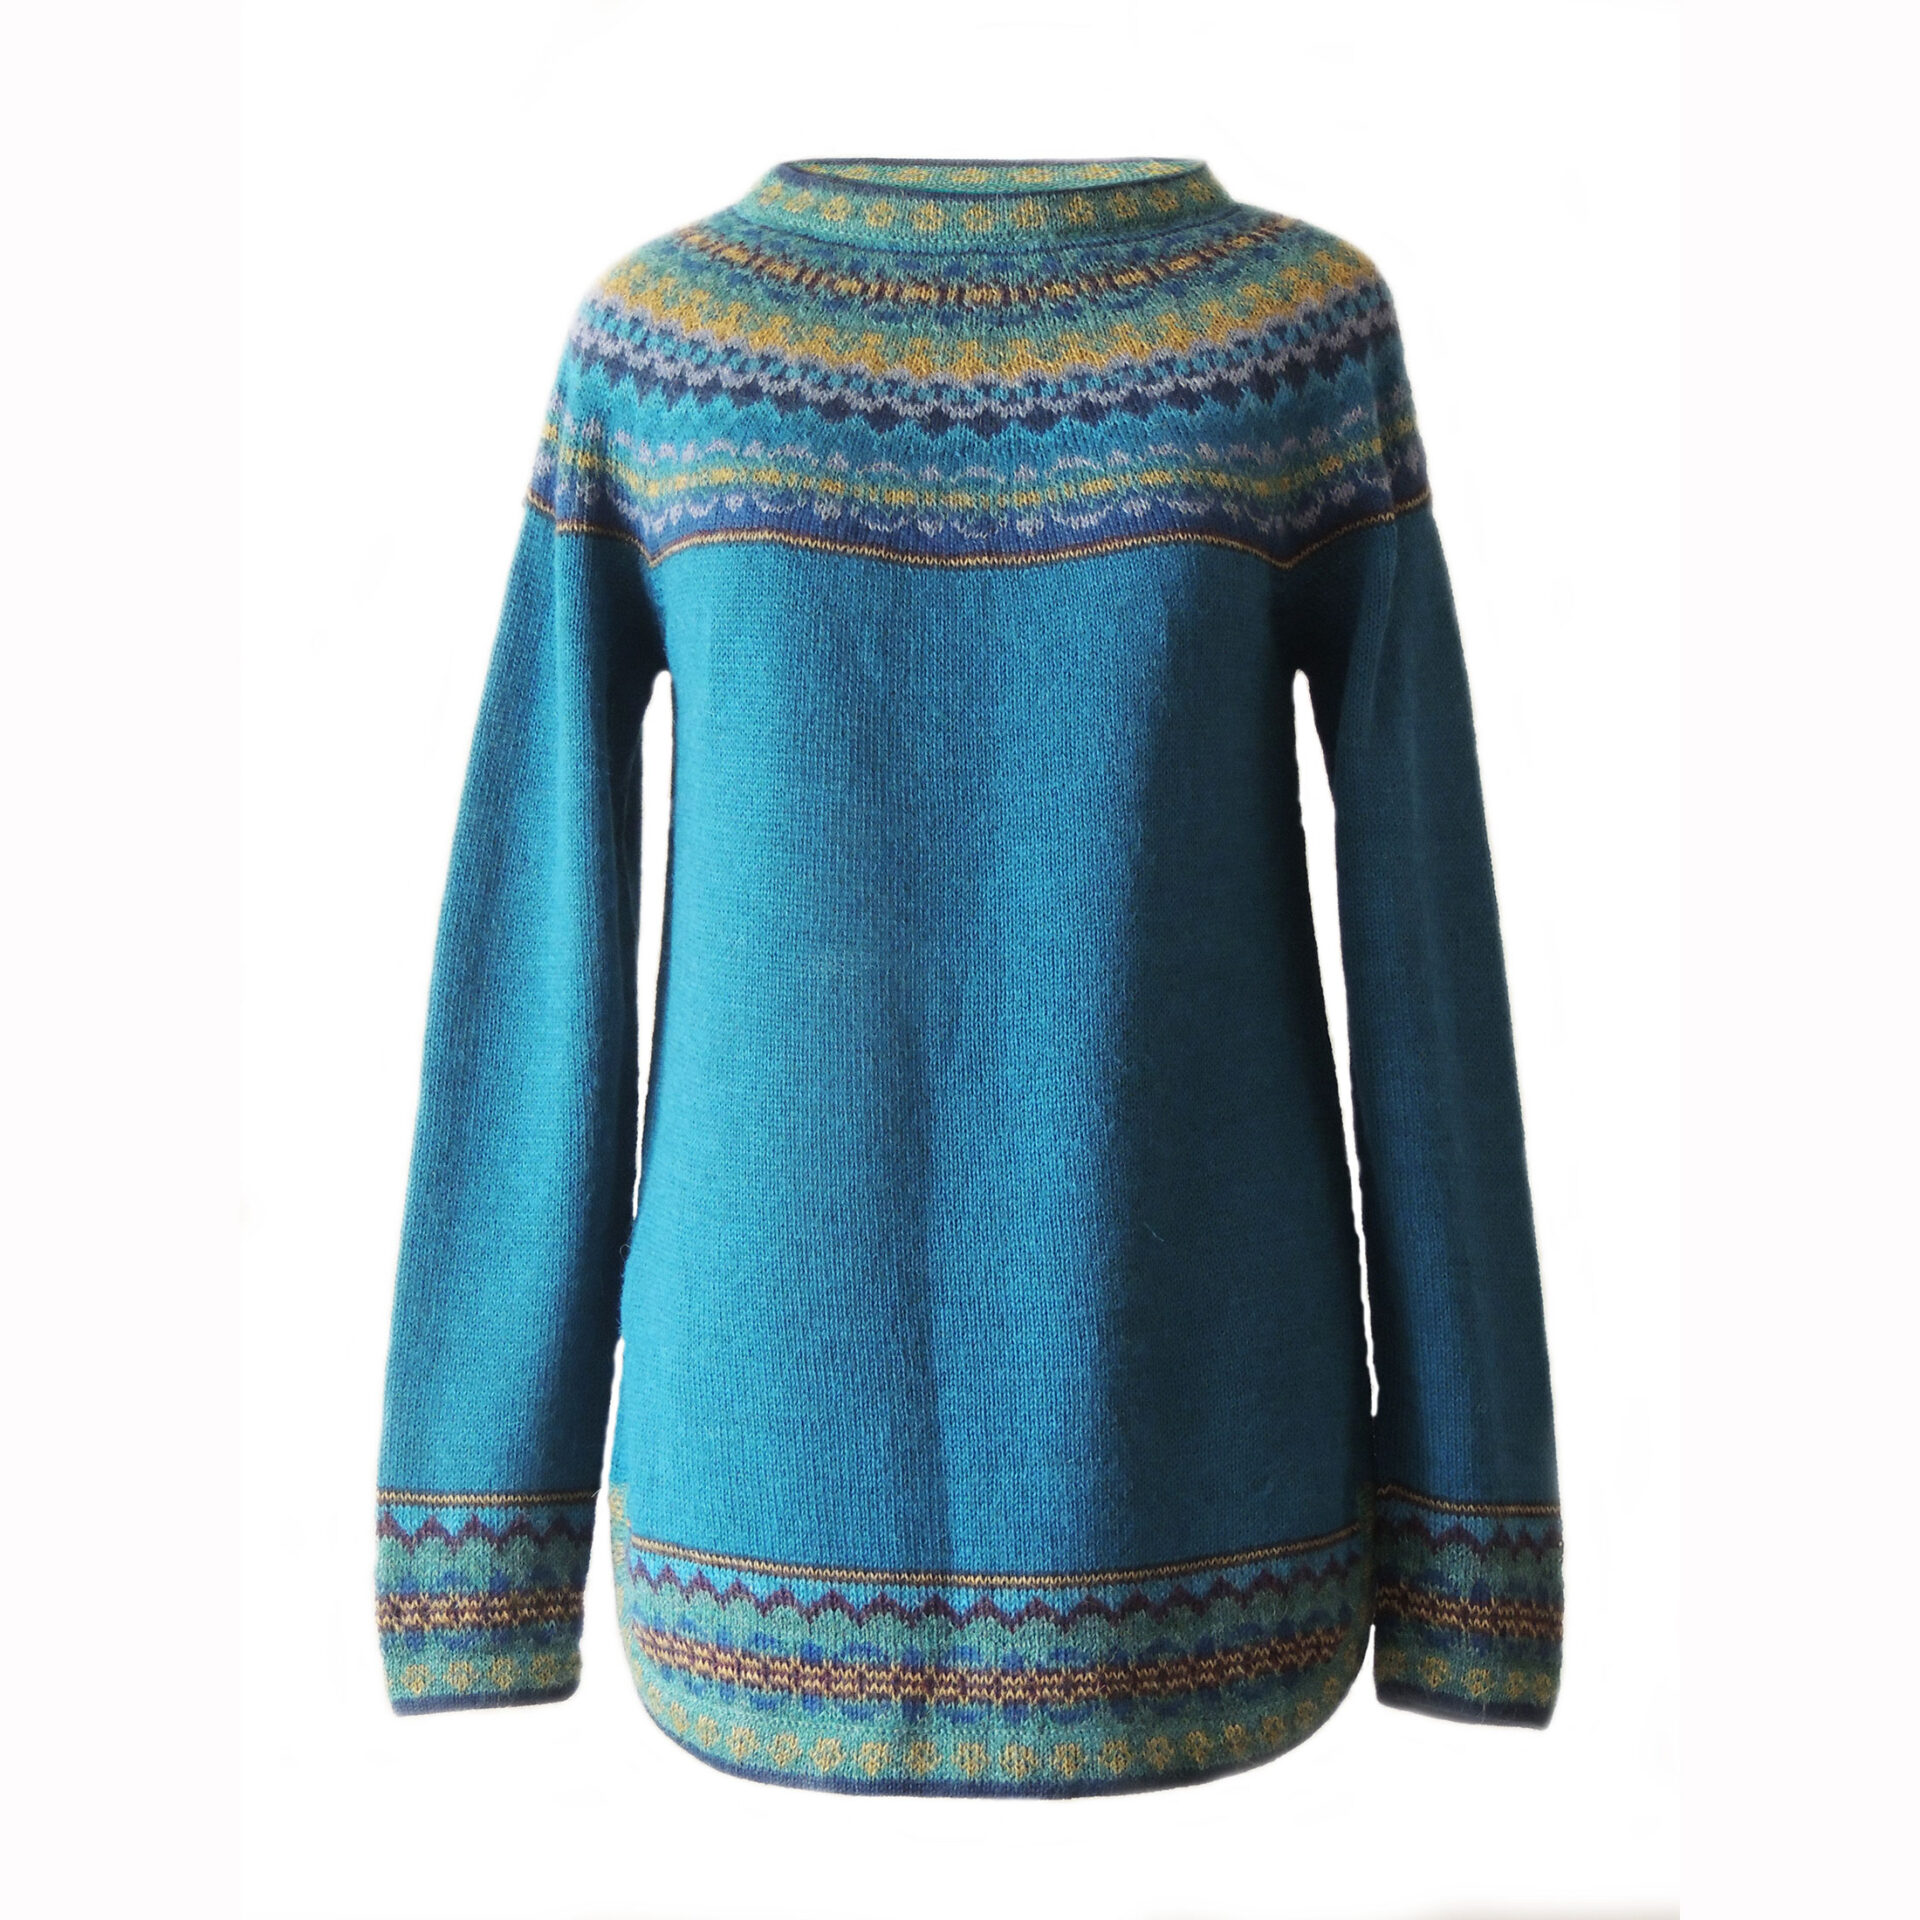 PopsFL knitwear wholesale  women's pullover sweater made in soft 100% alpaca with a symmetrical patterns in amber and different shades